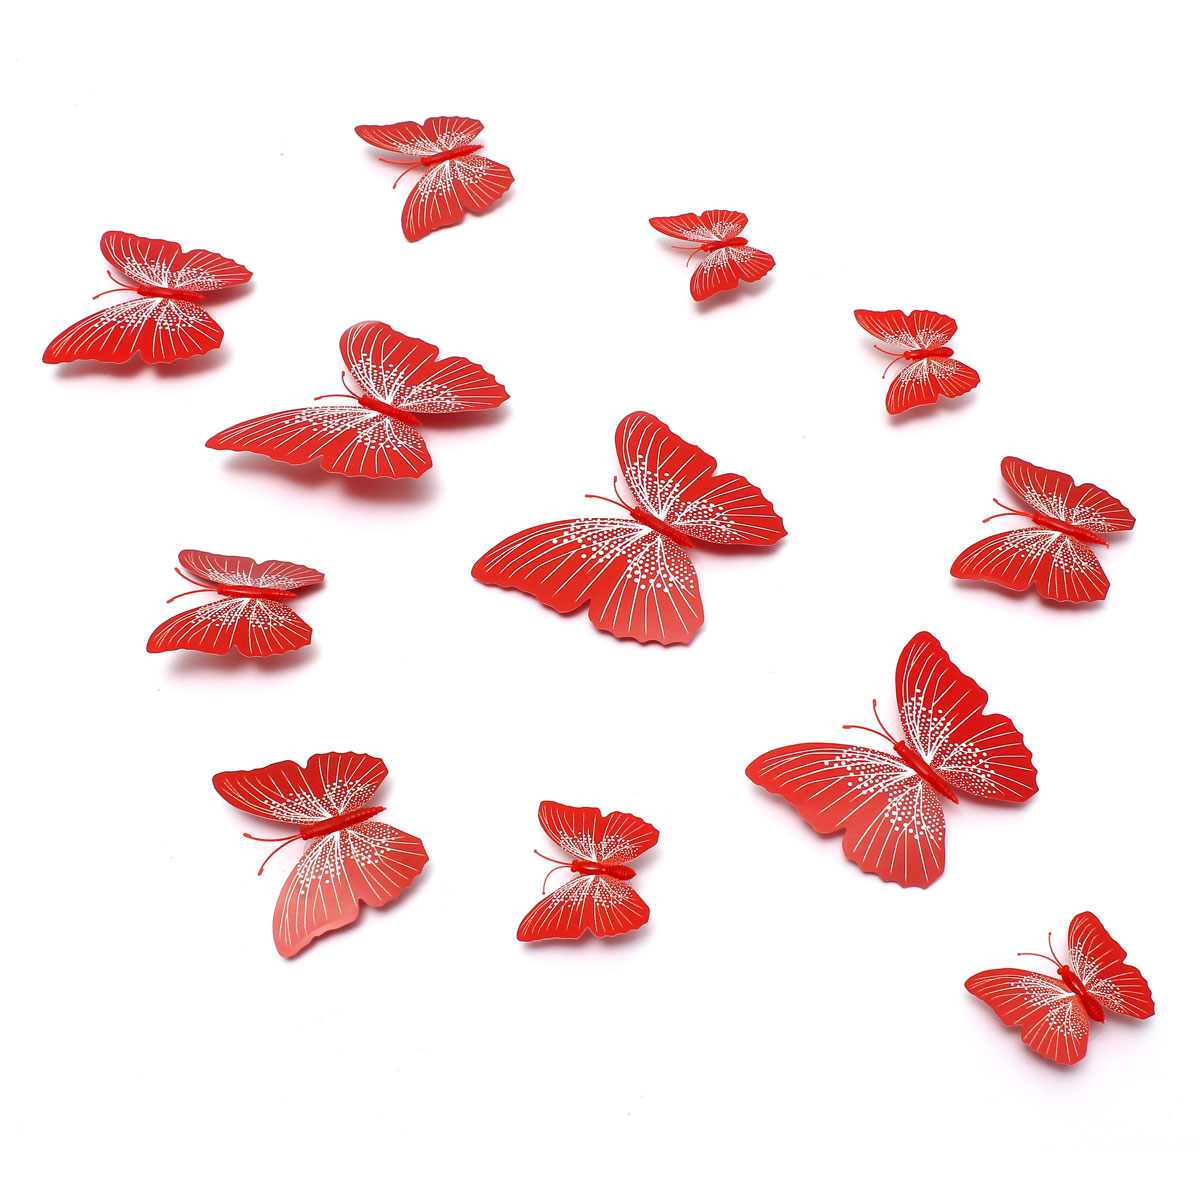 12PCS-3D-Butterfly-Art-Design-Decals-Wall-Stickers-Home-Decor-Room-Wedding-Party-Decorations-1006755